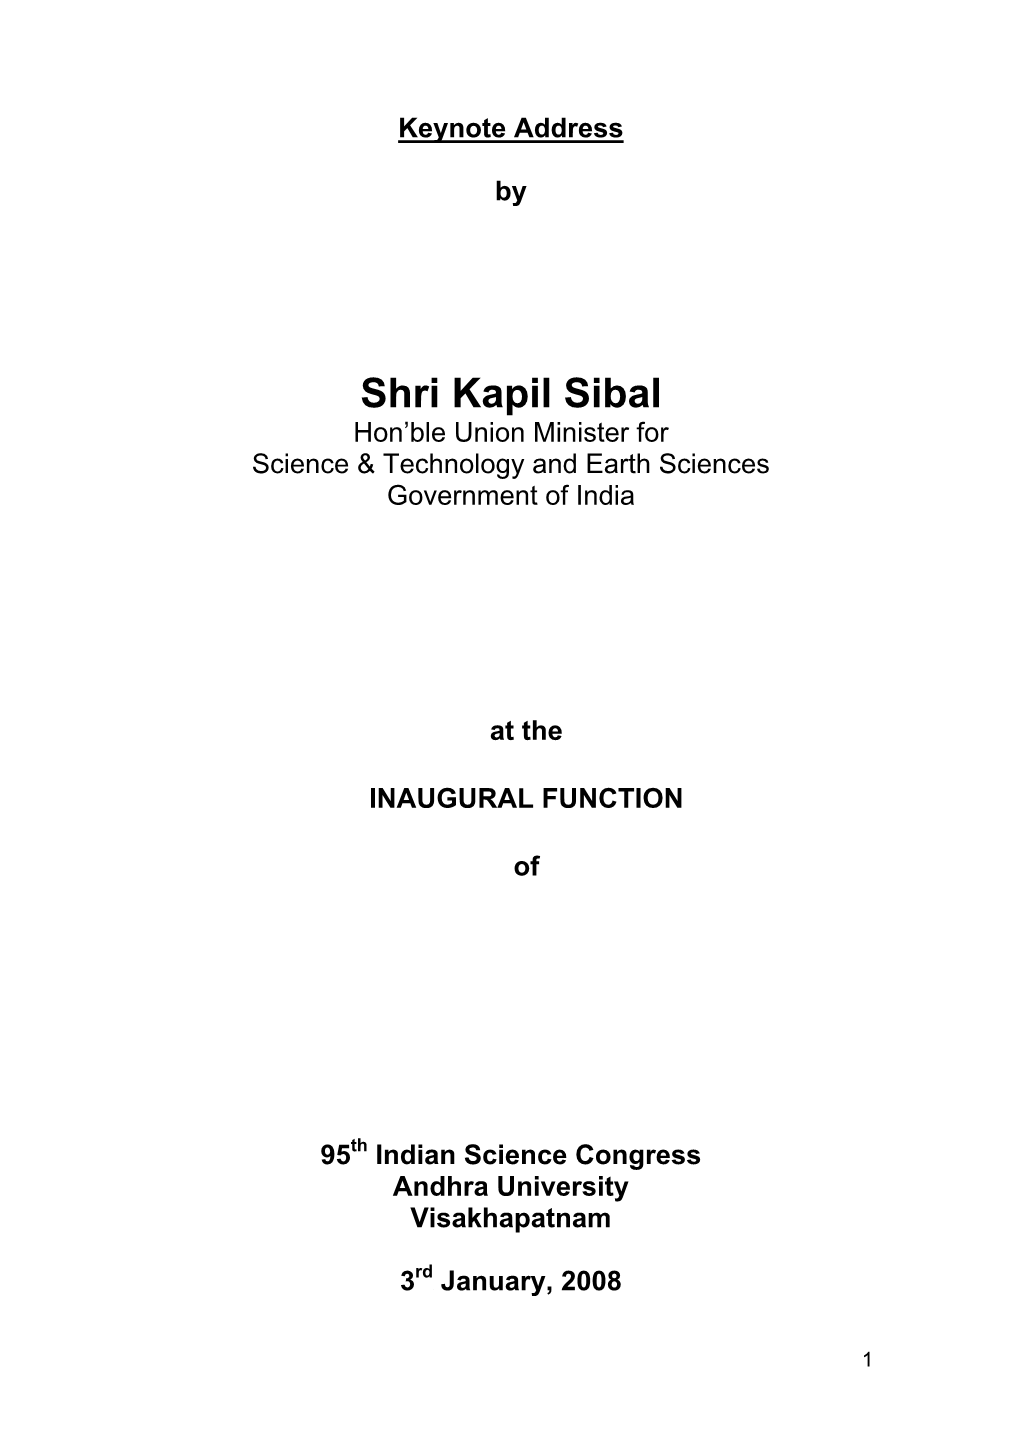 Shri Kapil Sibal Hon’Ble Union Minister for Science & Technology and Earth Sciences Government of India